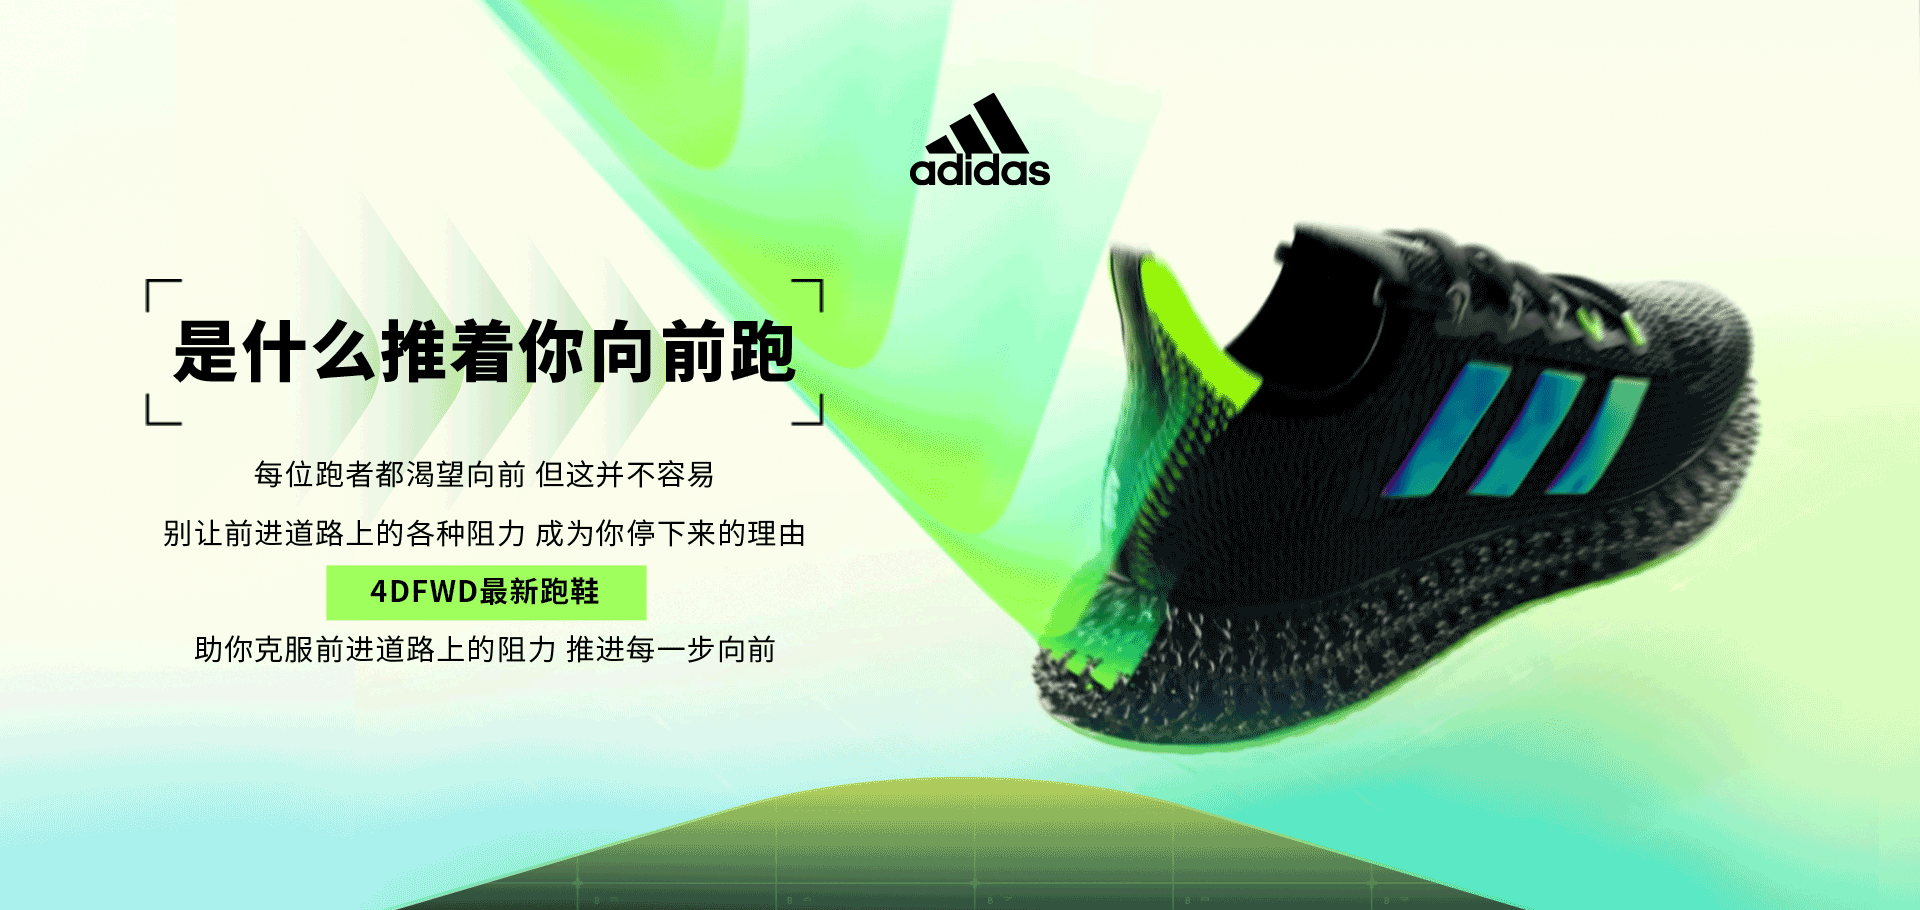 https://img.adidas.com.cn/resources/activePage/2021/8/4d/1/1_01.png